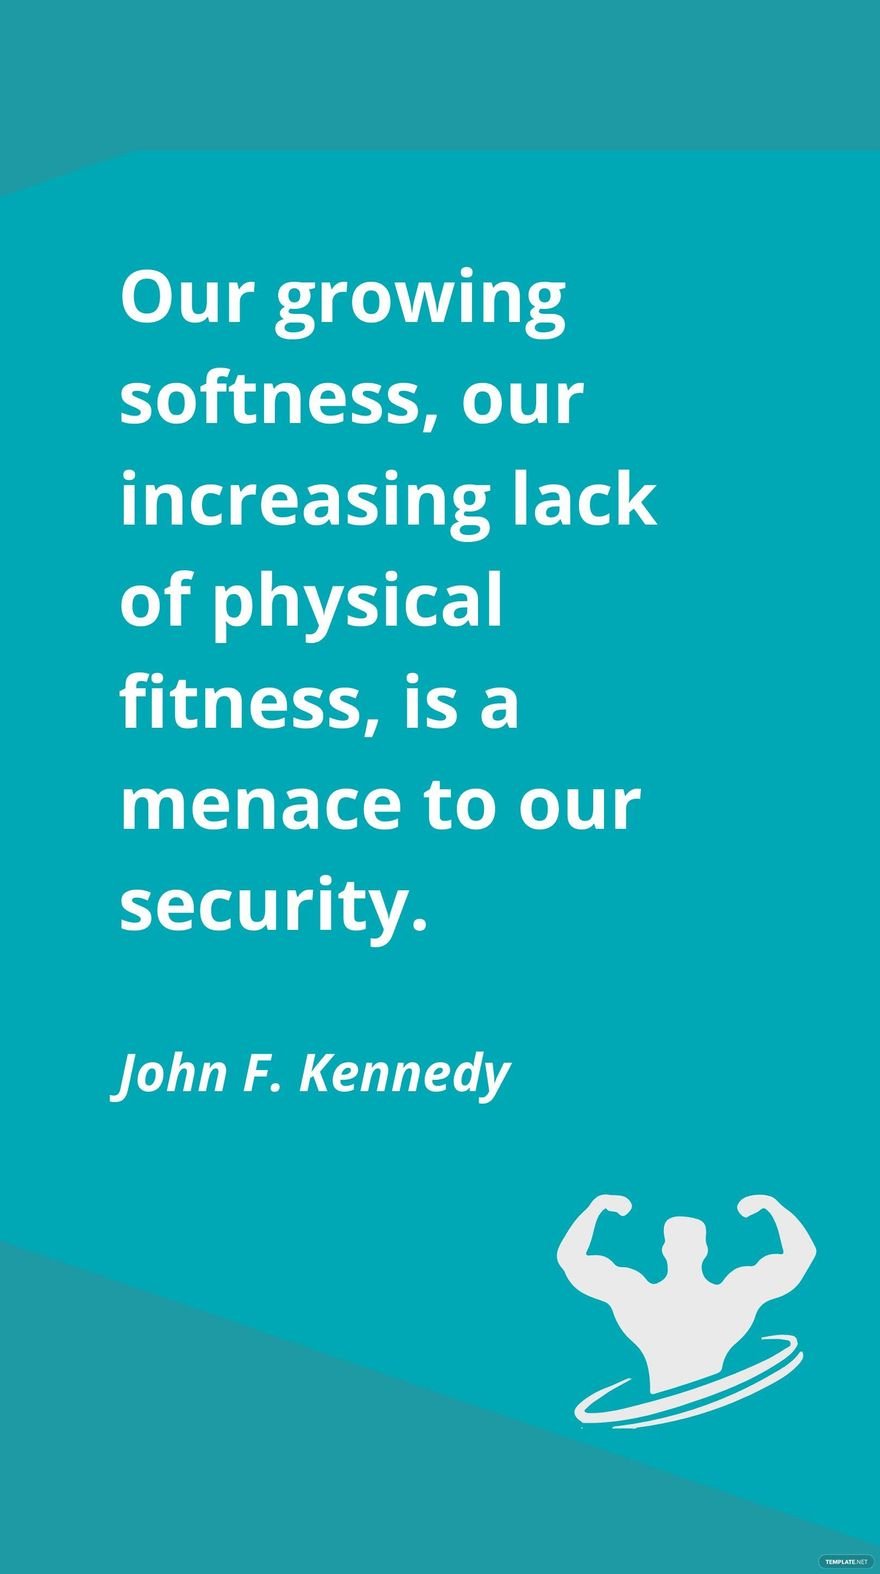 Free John F. Kennedy - Our growing softness, our increasing lack of physical fitness, is a menace to our security. in JPG